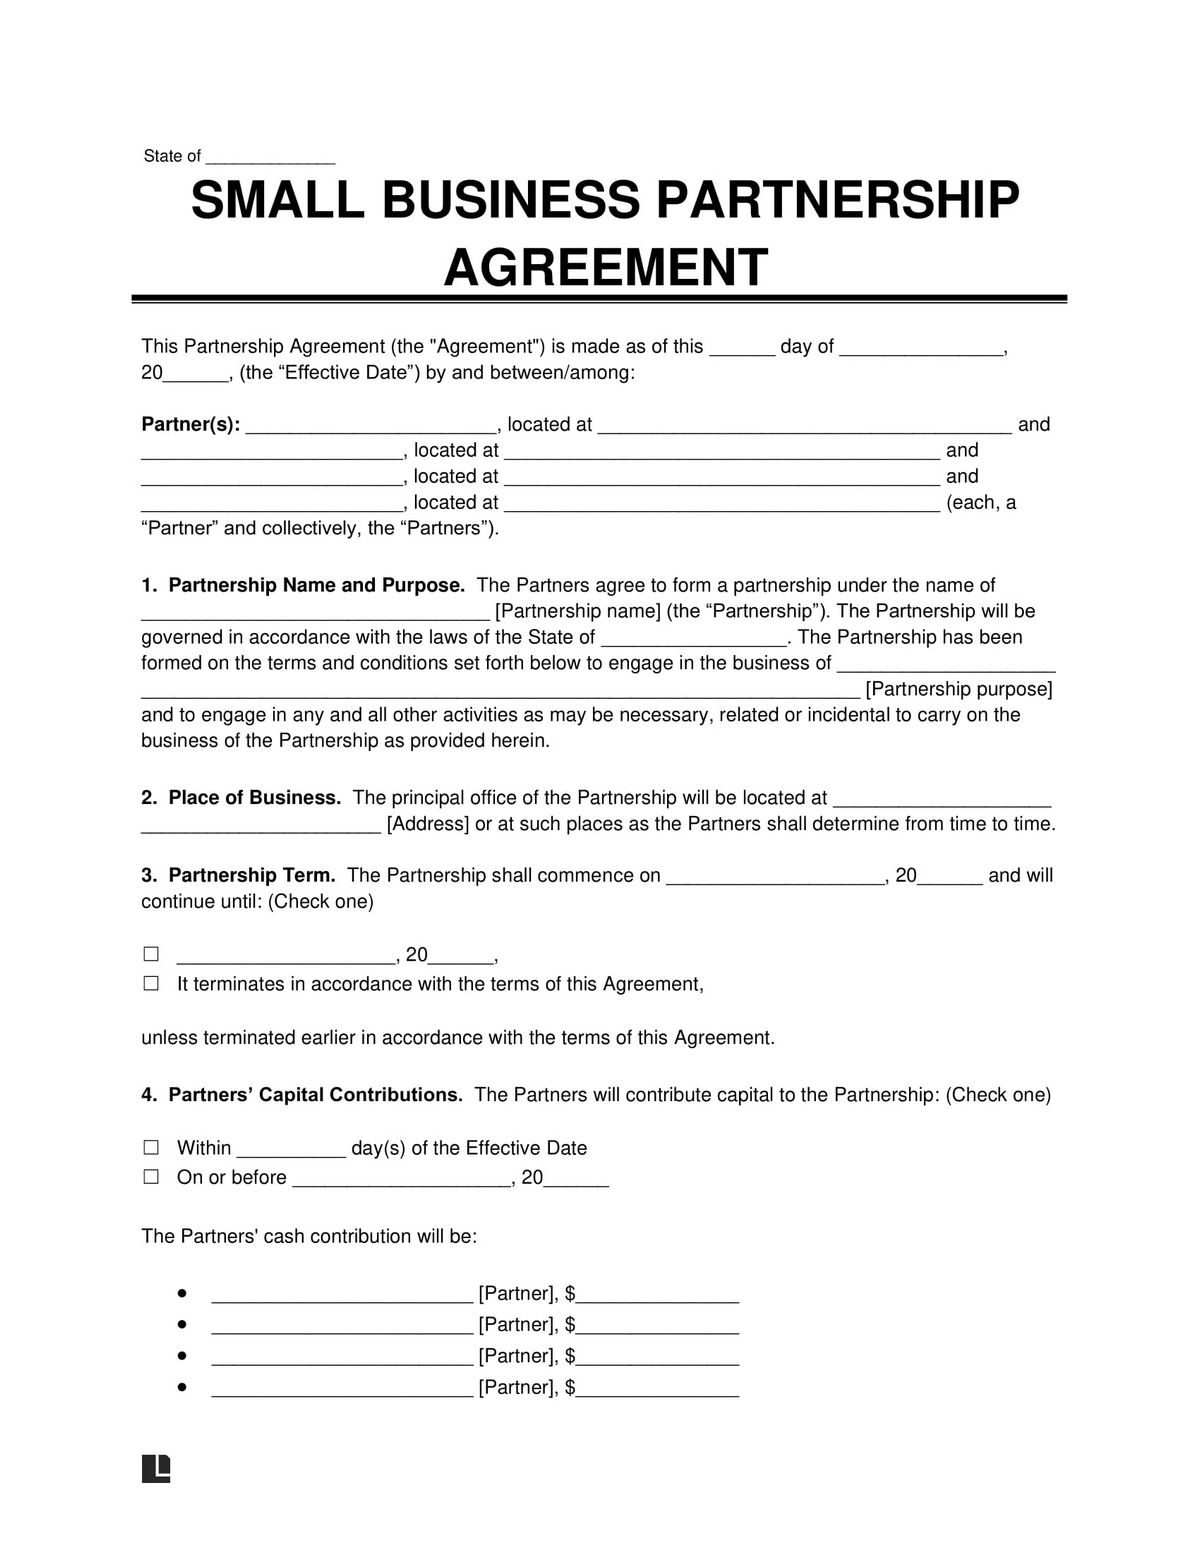 How to Plan for Changes in Partnership Ownership with a Buy-Sell Agreement